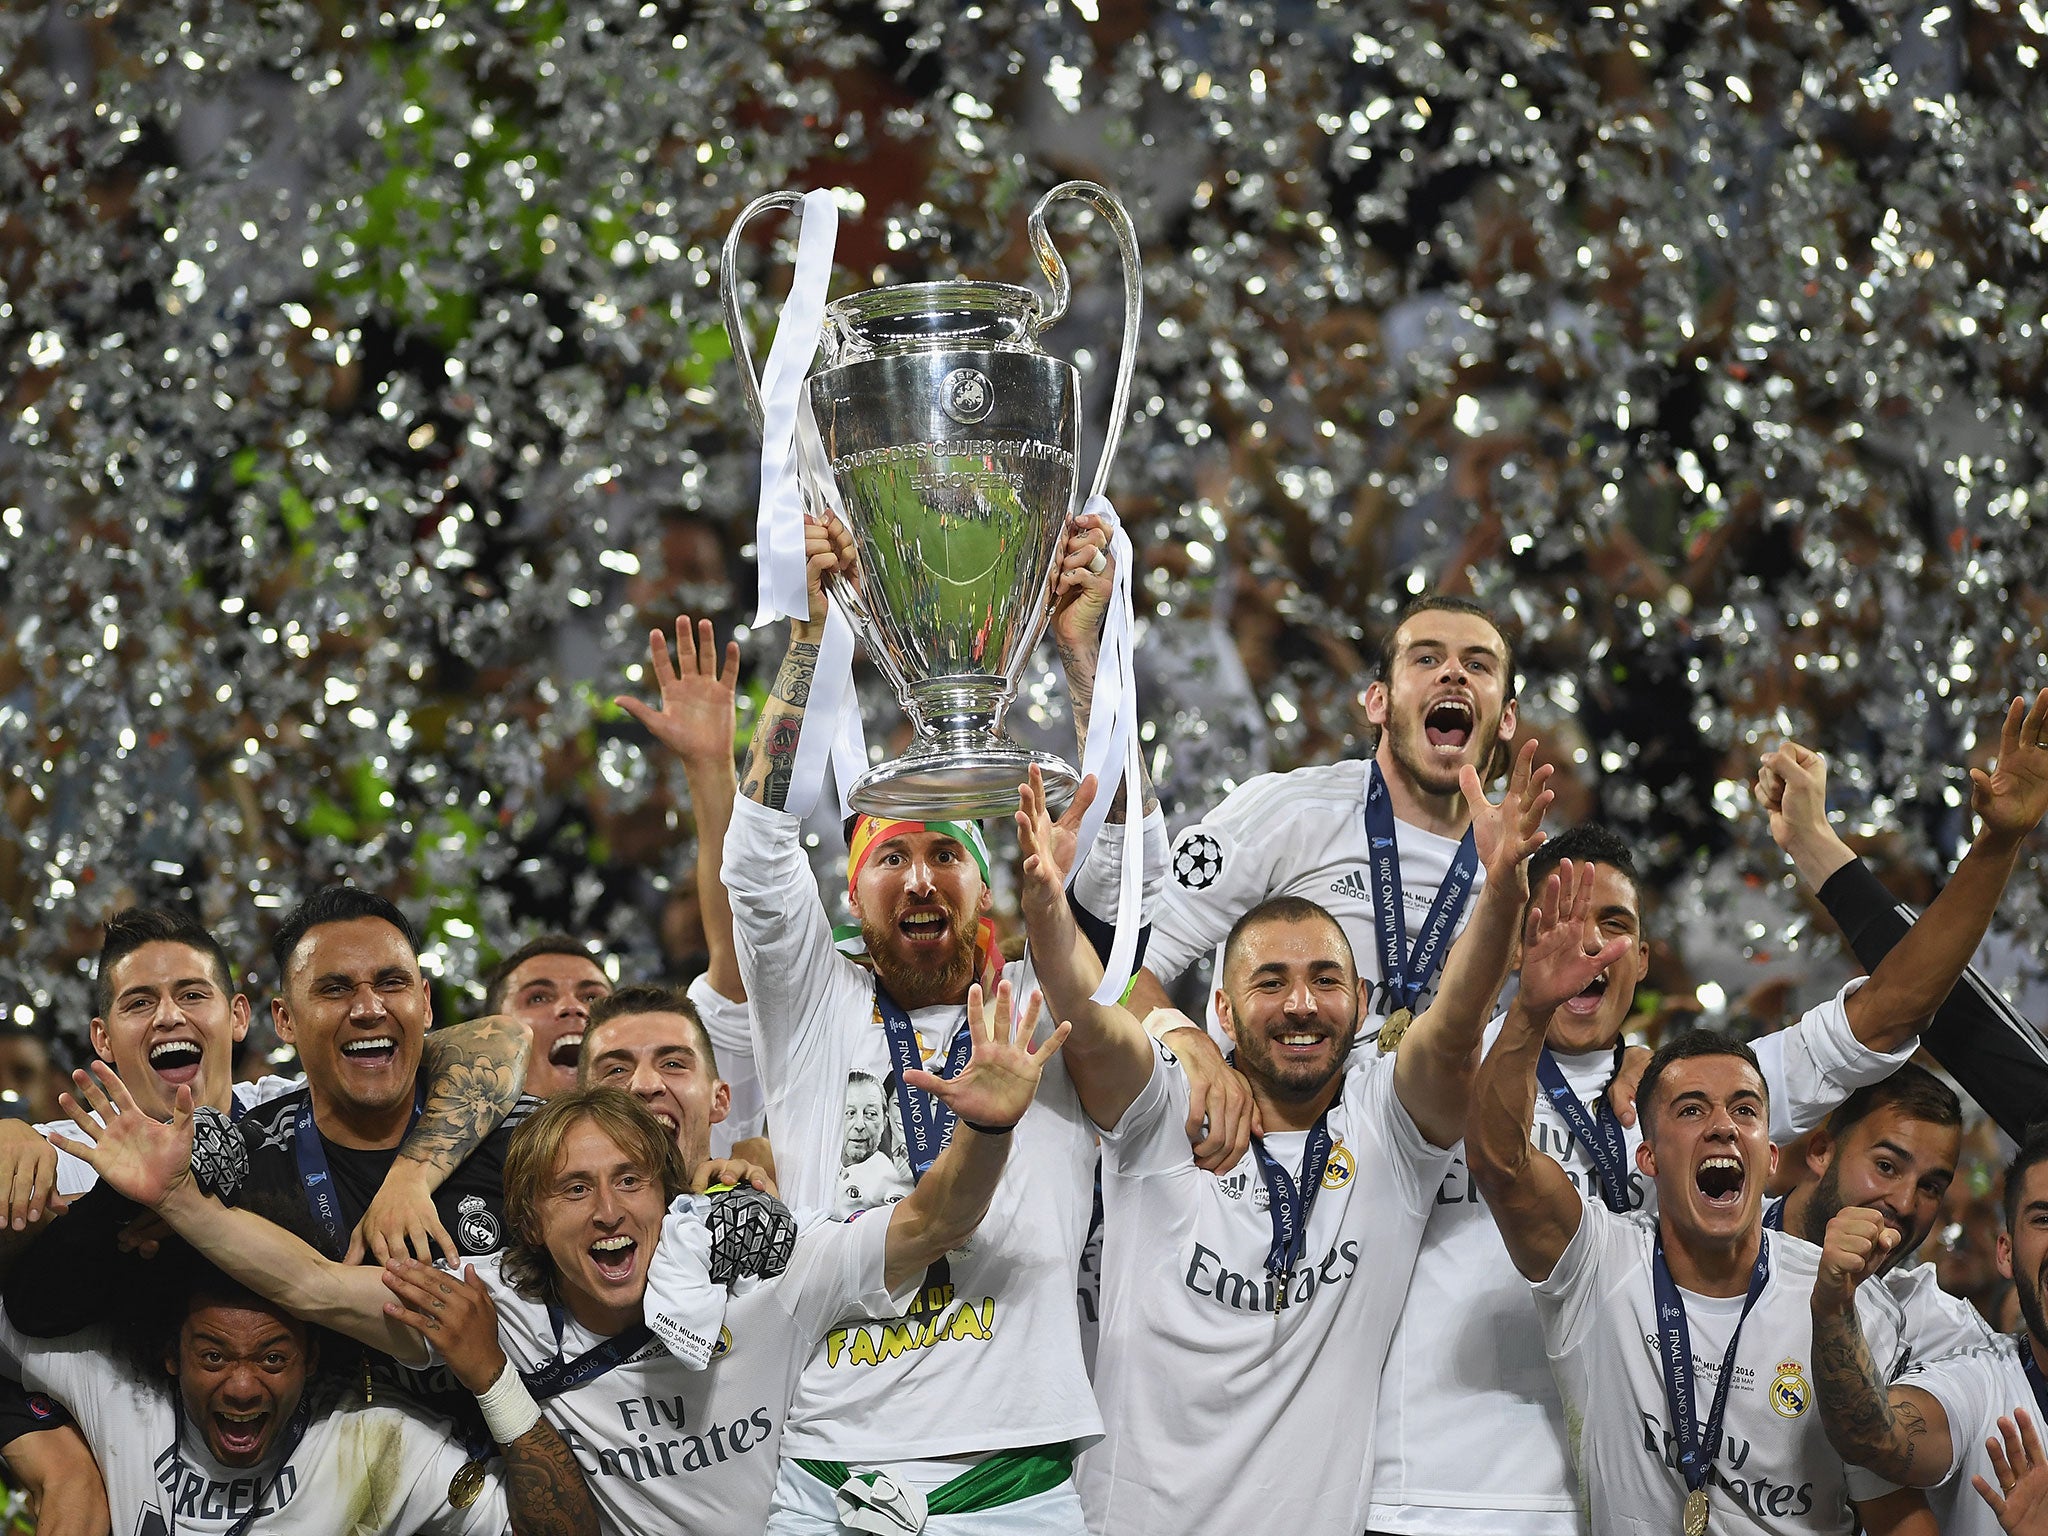 Real Madrid are the most successful club in Europe with 11 titles to their name